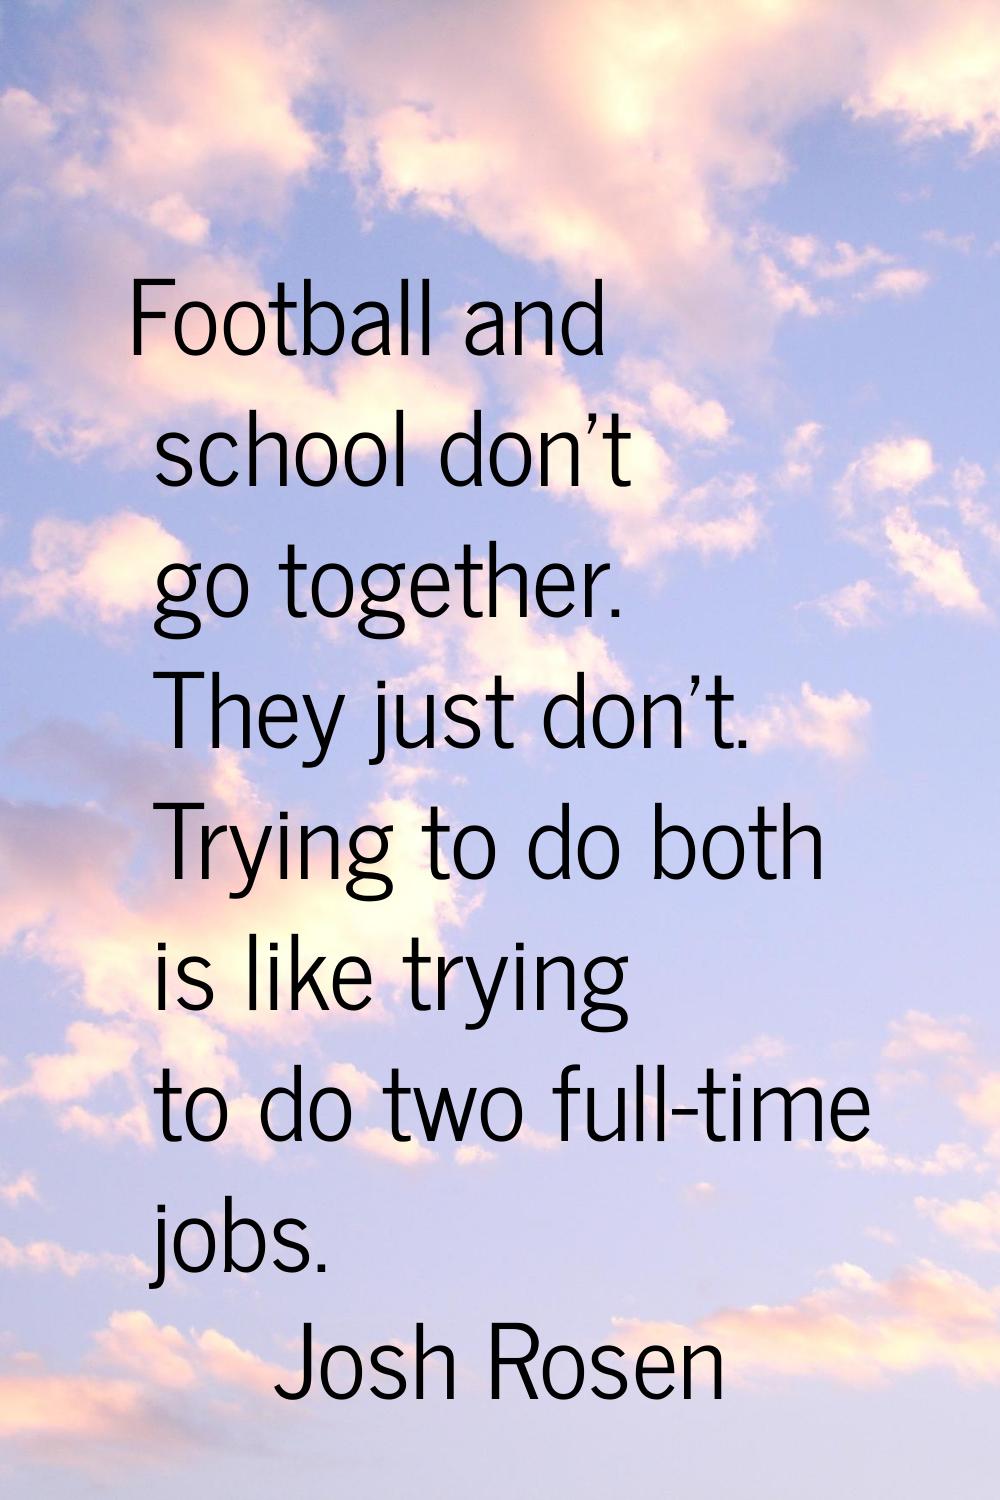 Football and school don't go together. They just don't. Trying to do both is like trying to do two 